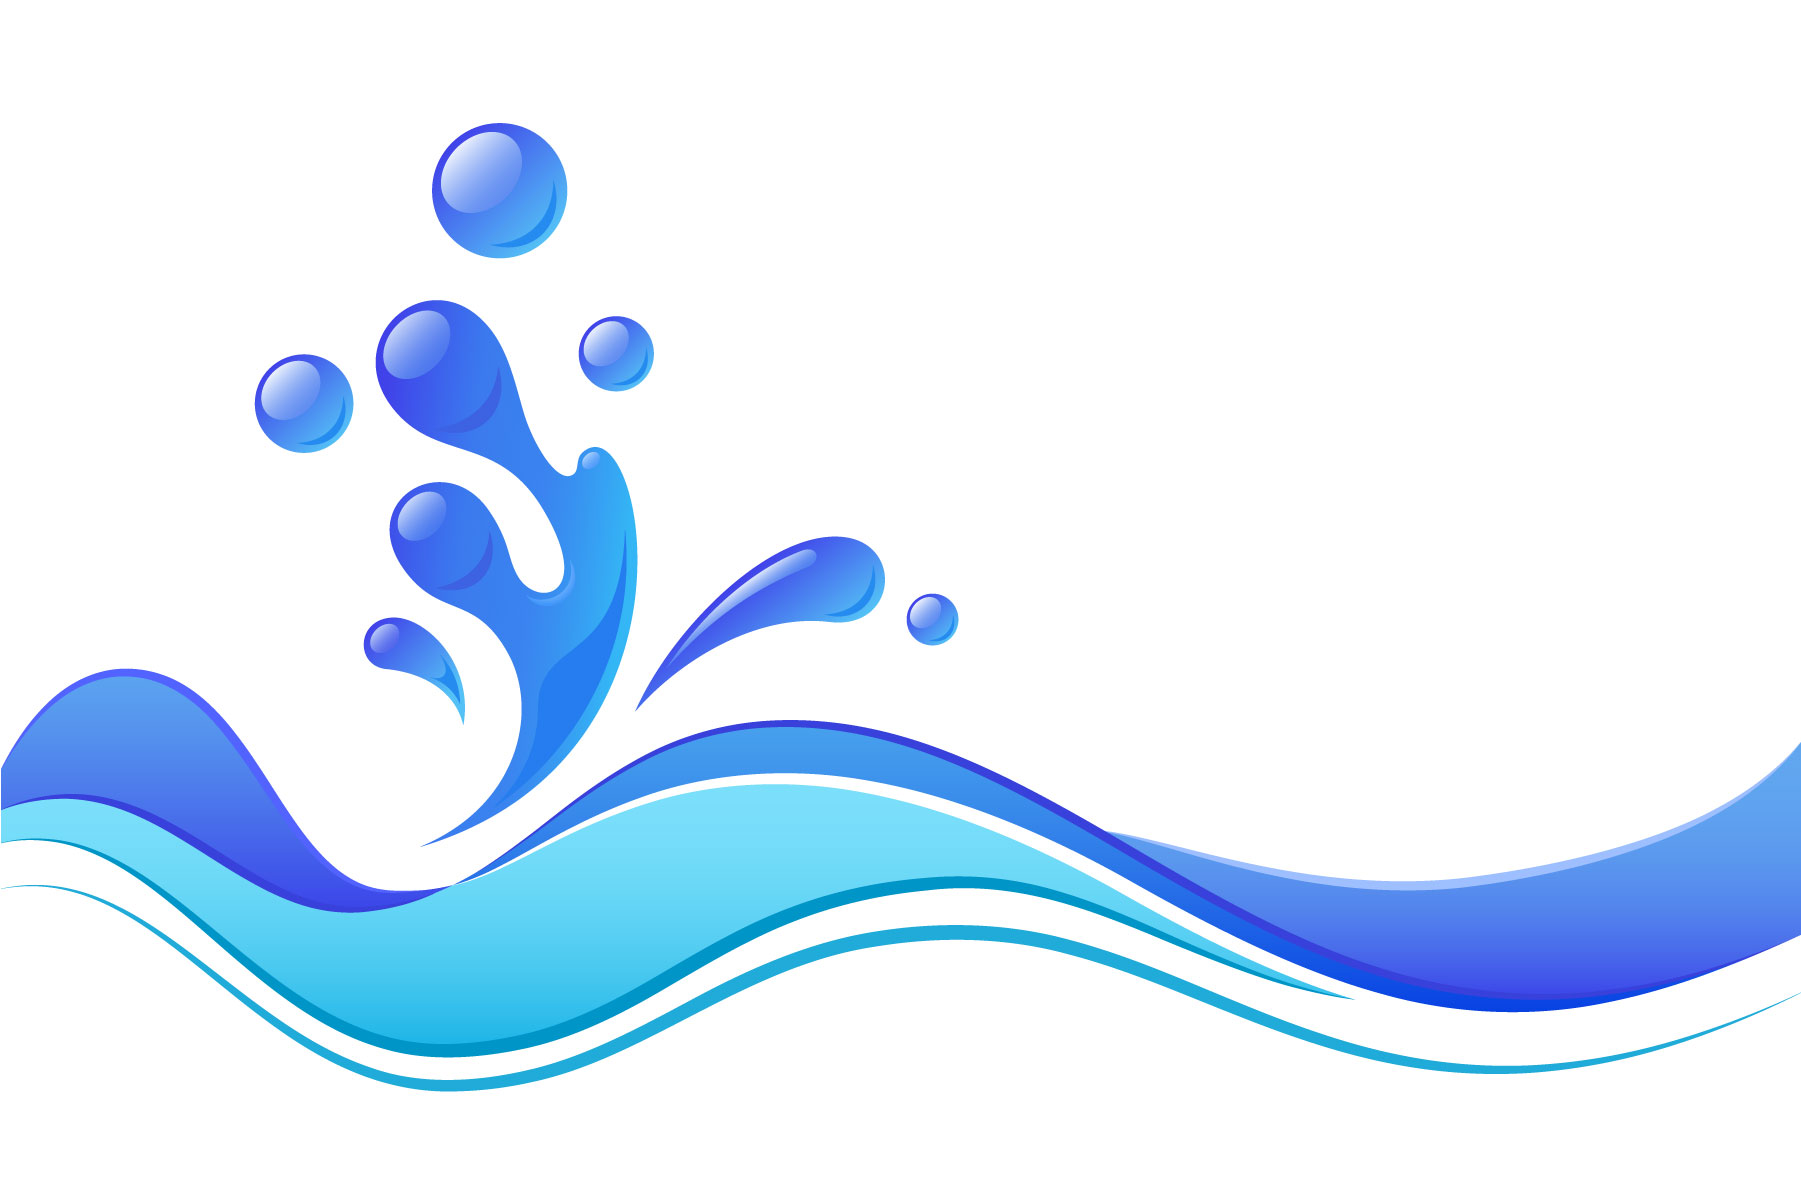 Flowing Water Clipart | Clipart Panda - Free Clipart Images